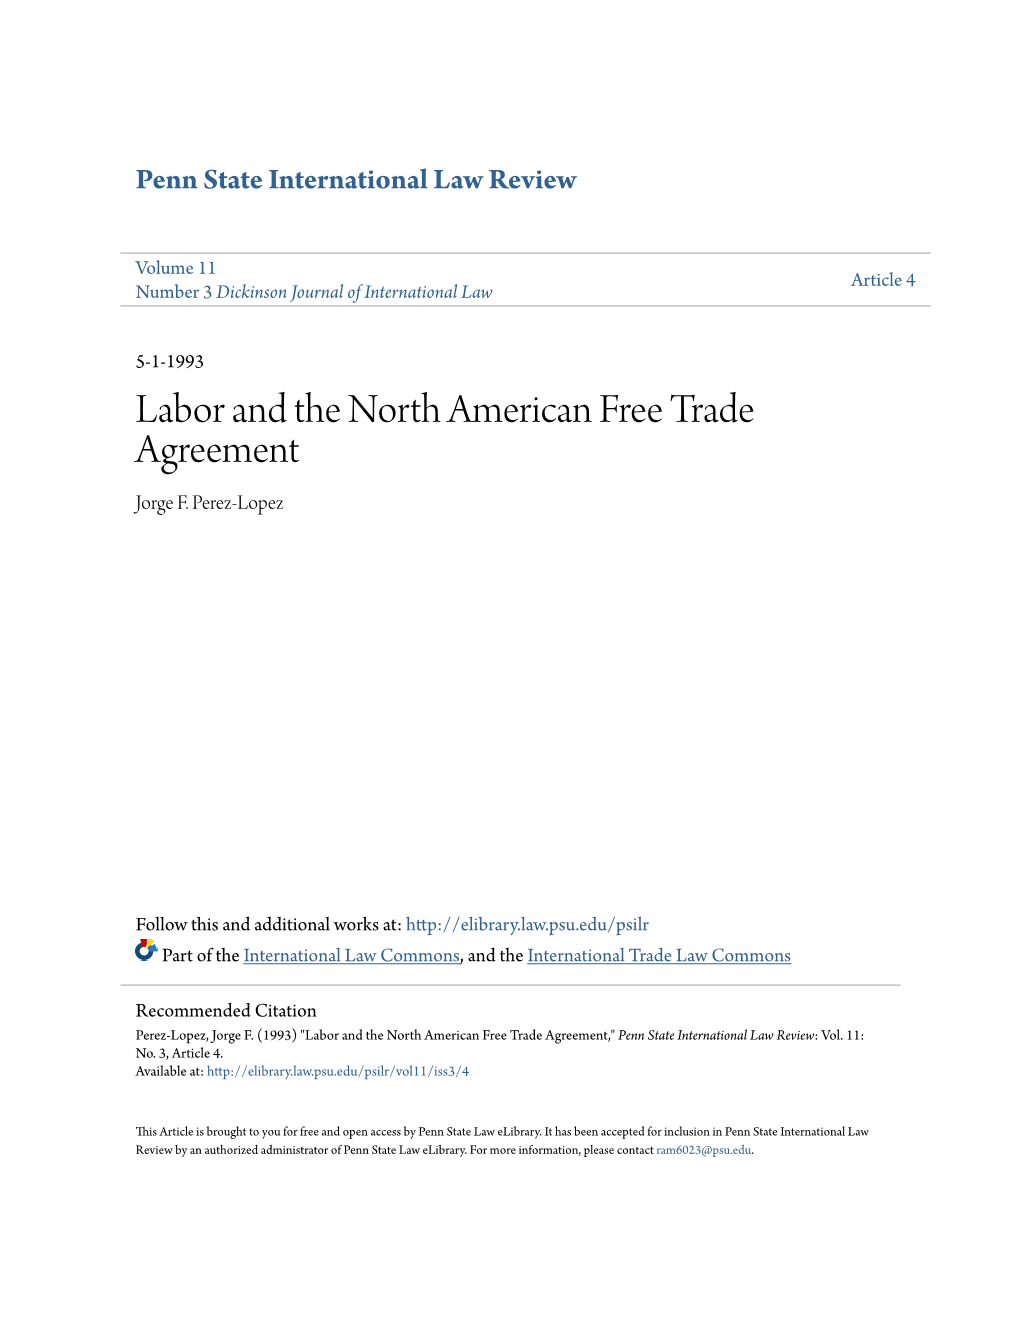 Labor and the North American Free Trade Agreement Jorge F